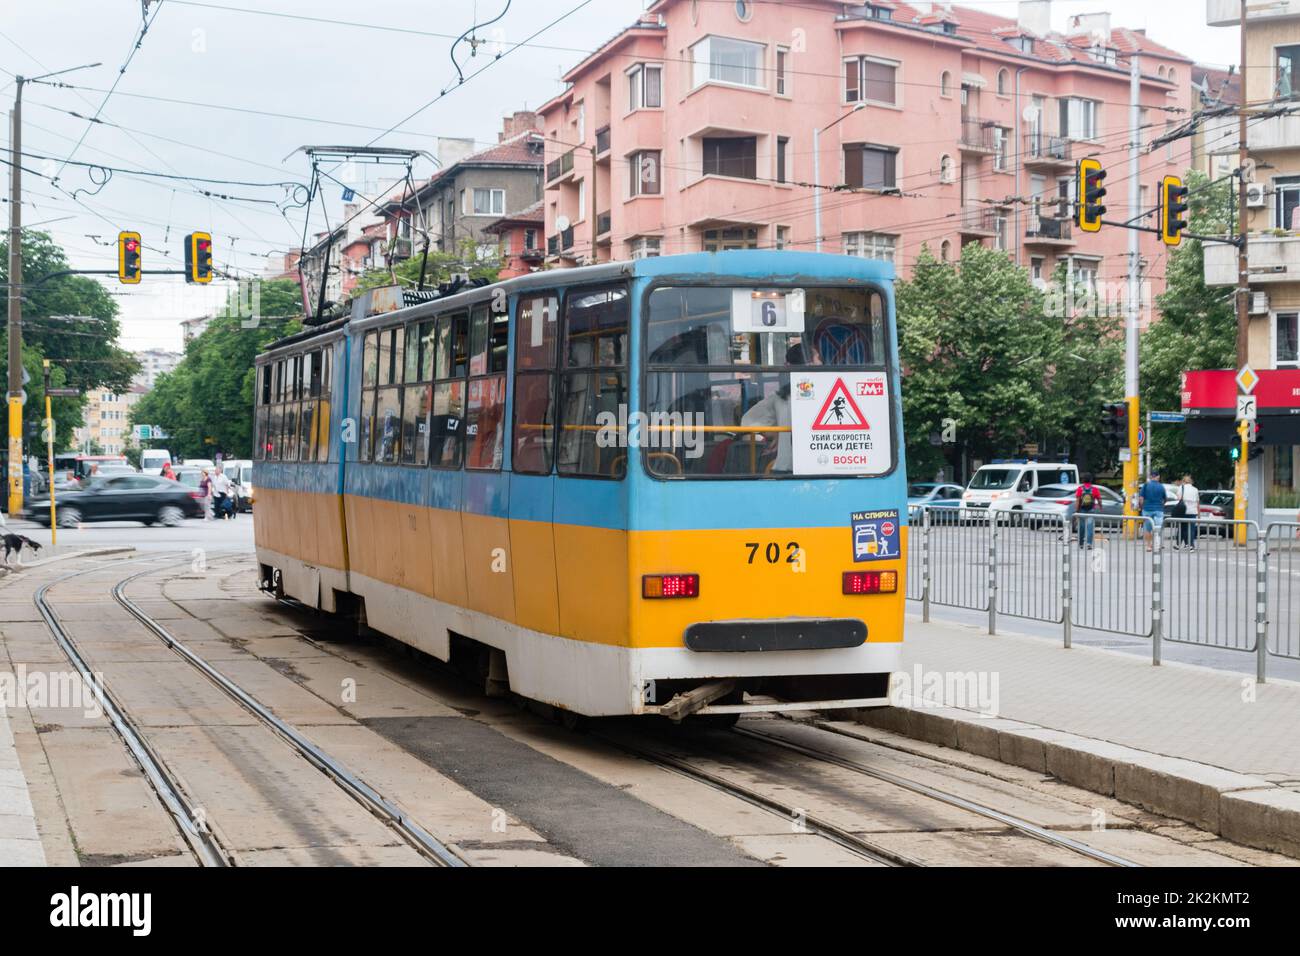 Sofia, Bulgaria - June 6, 2022: Blue and yellow tram on tram stop in Sofia. Stock Photo